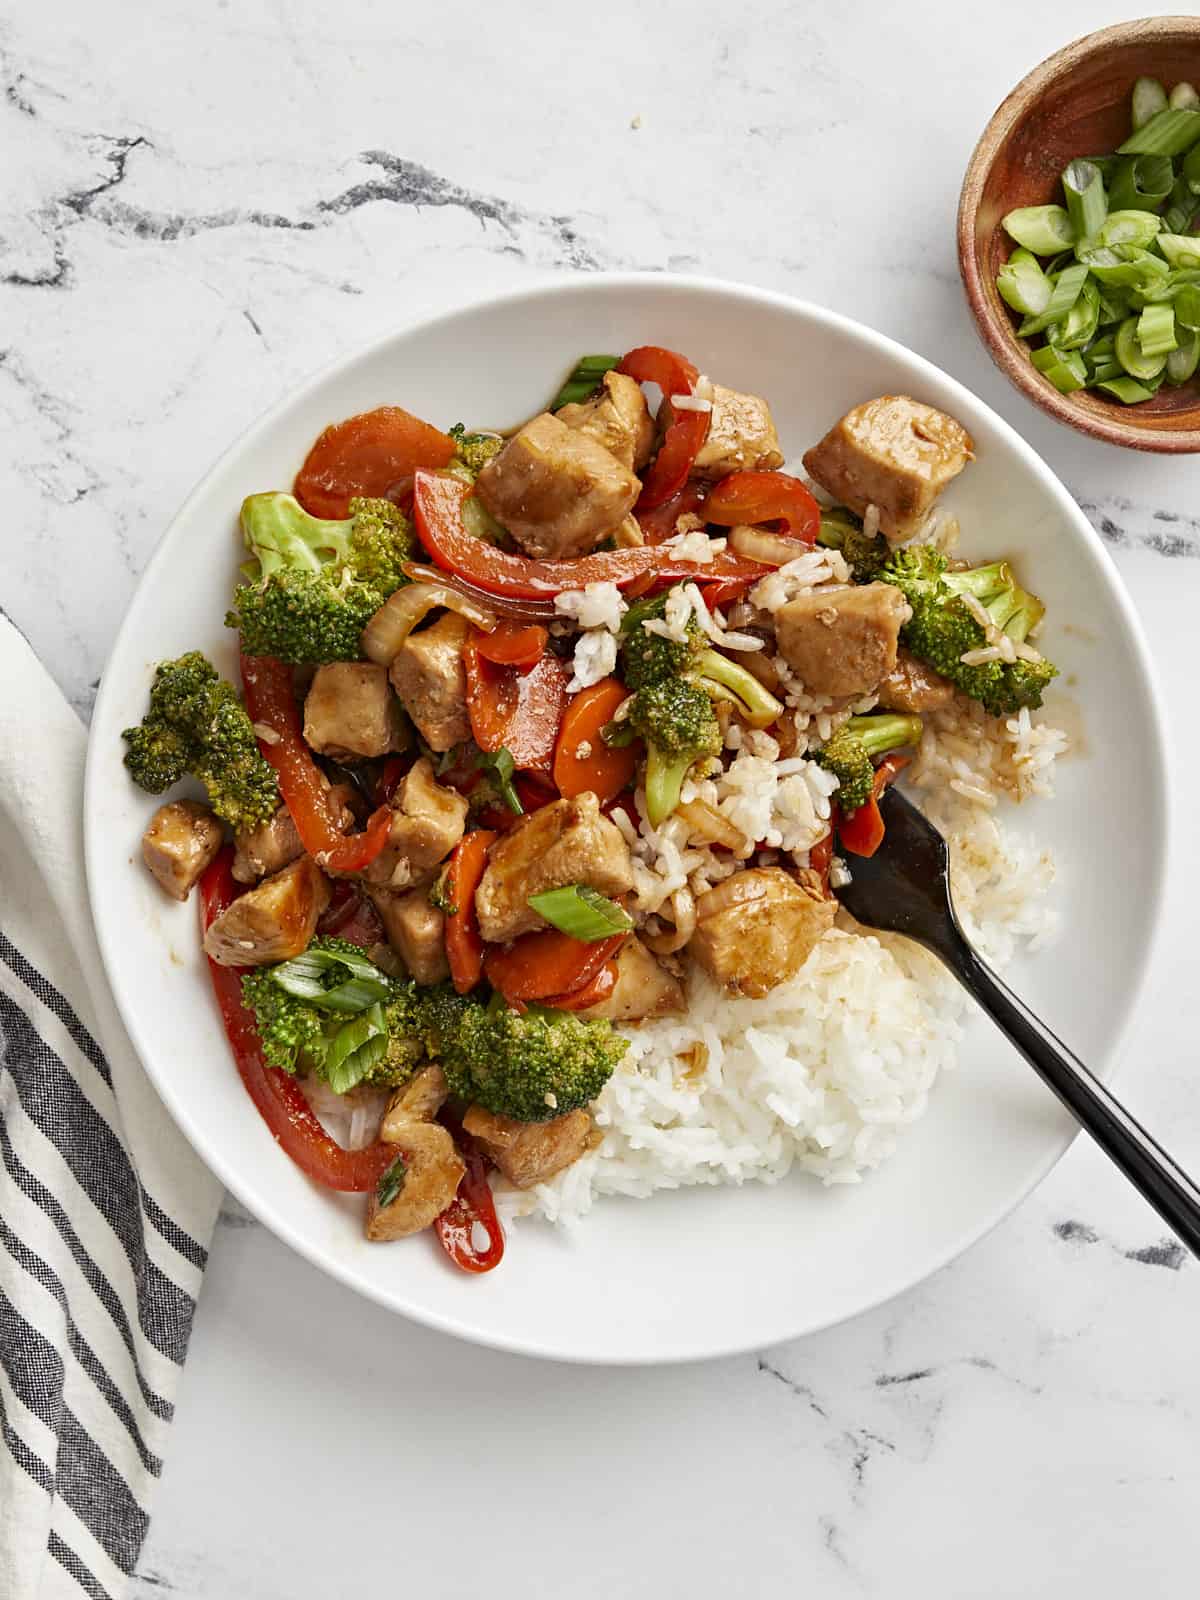 Chicken stir fry on a plate with white rice and a fork serving some out.